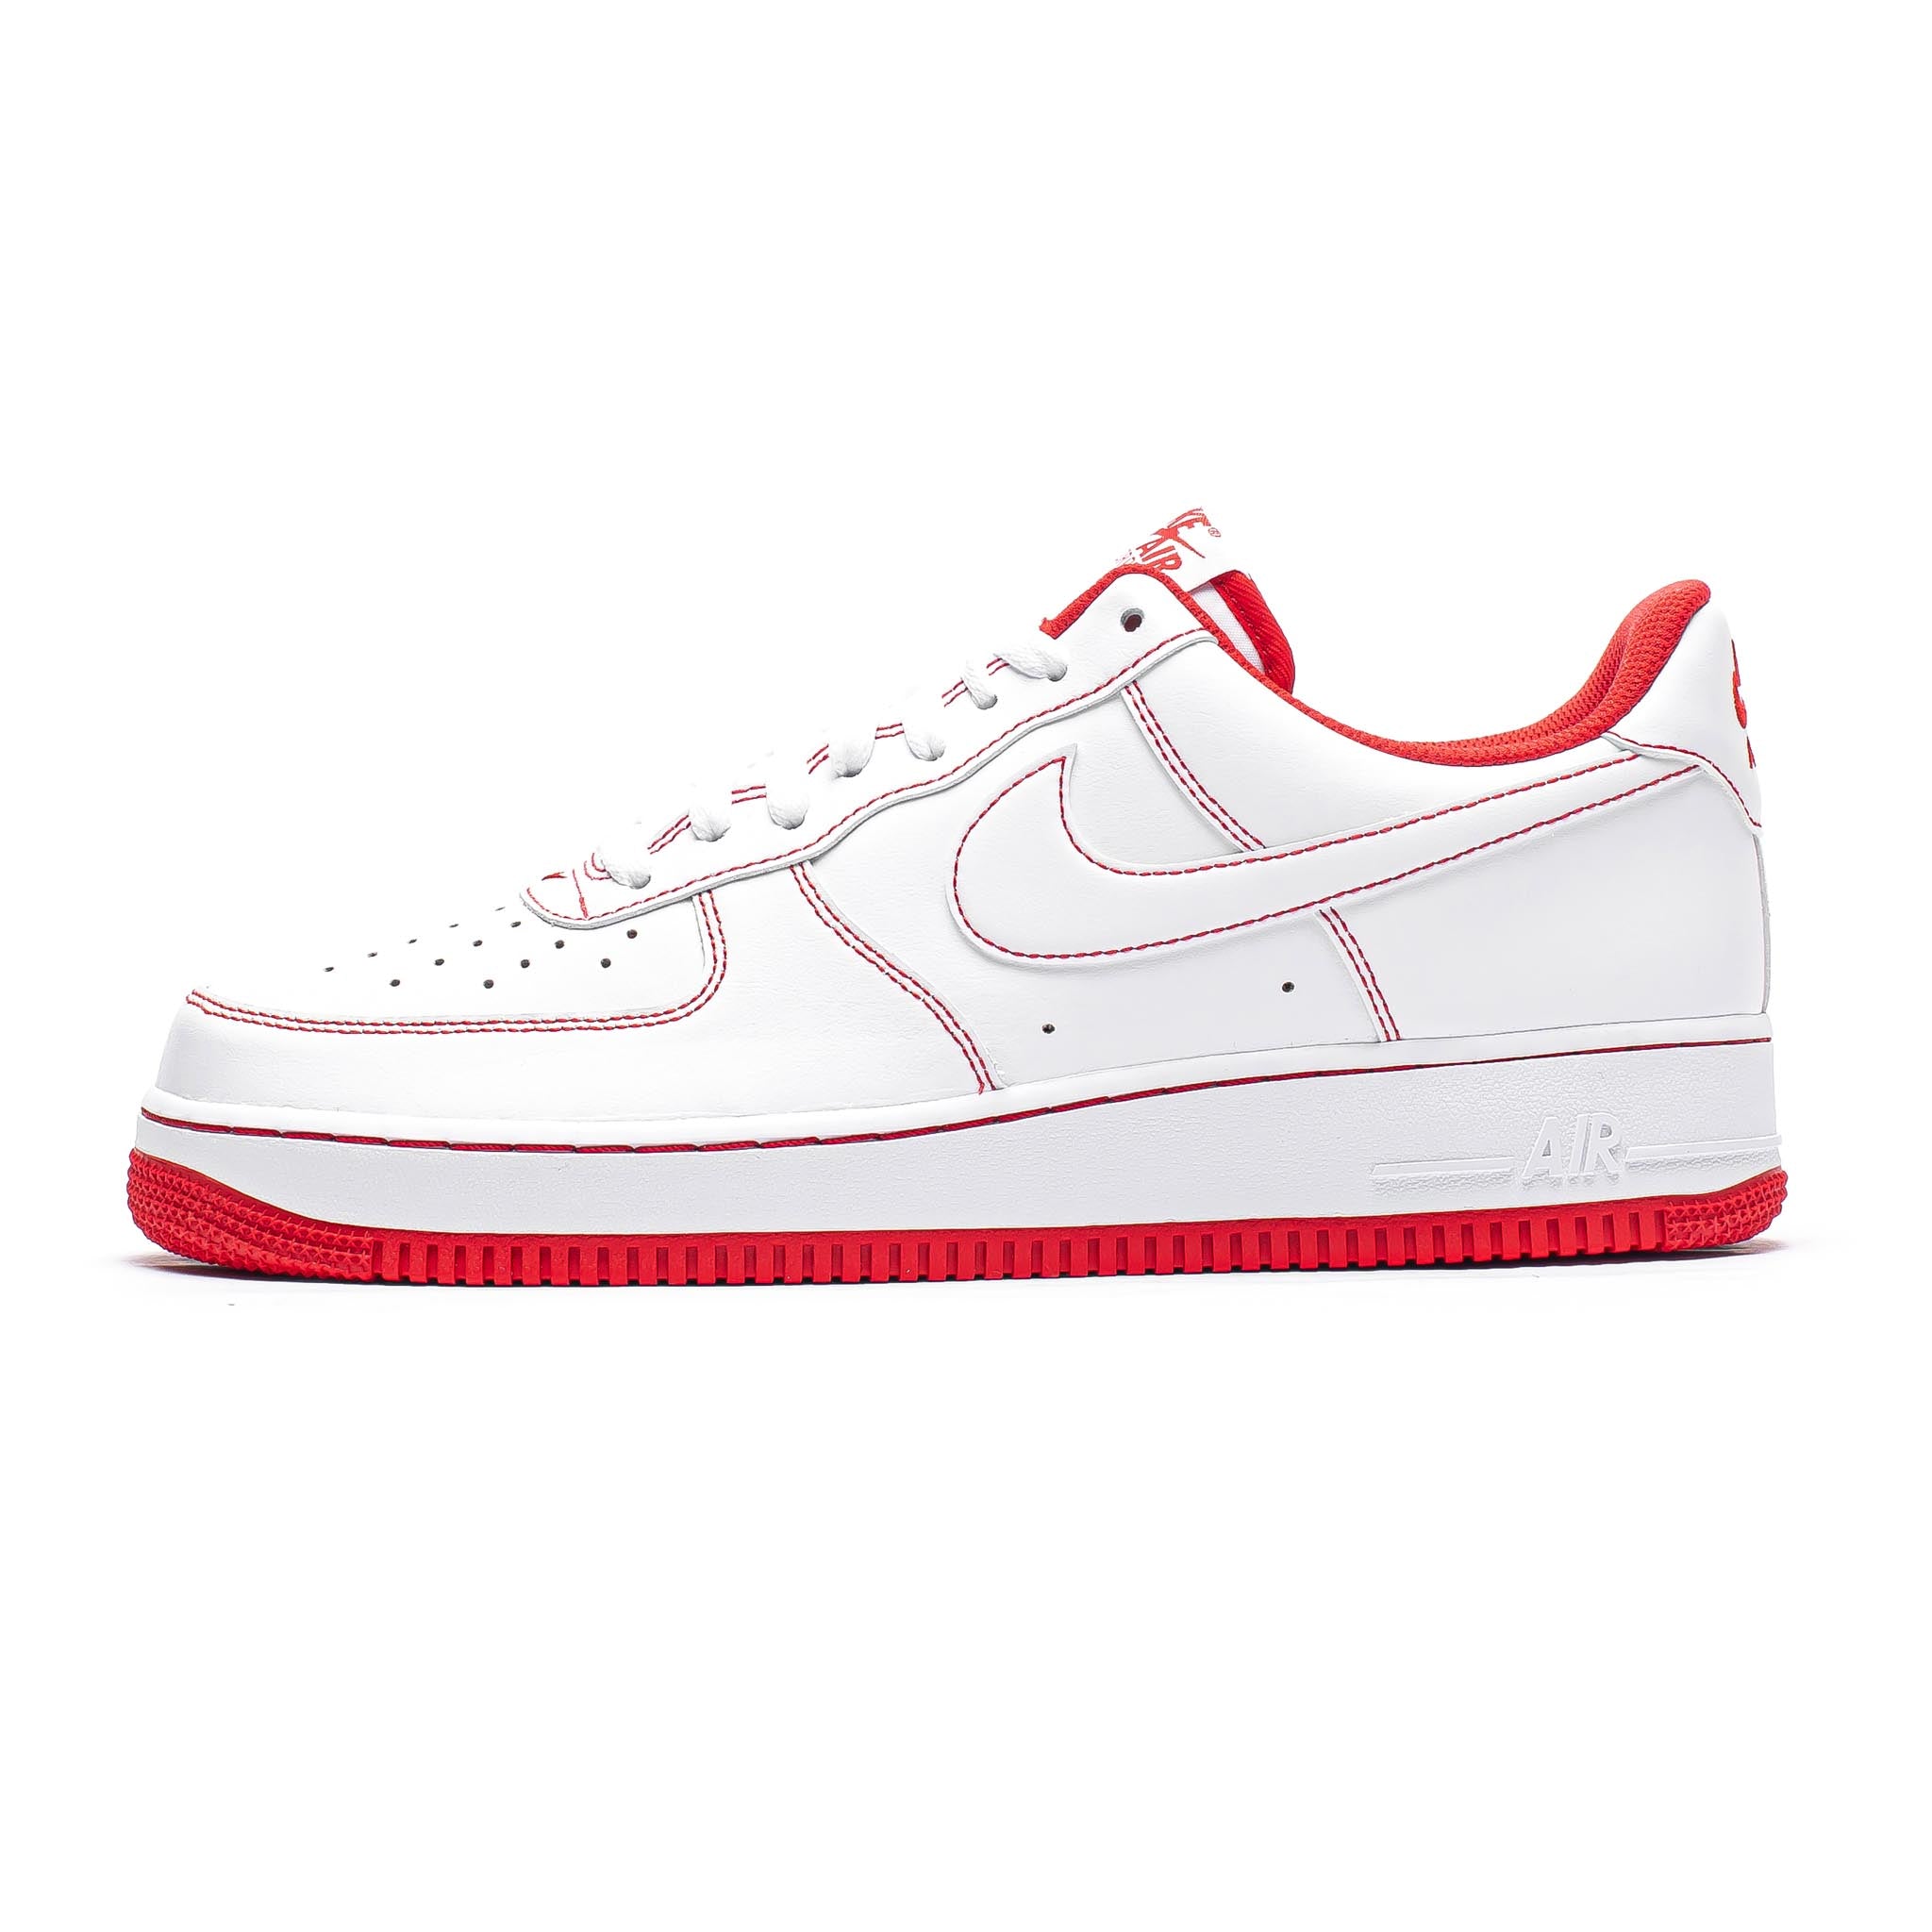 Nike Air Force 1 '07 'Contrast Stitch' White/University Red